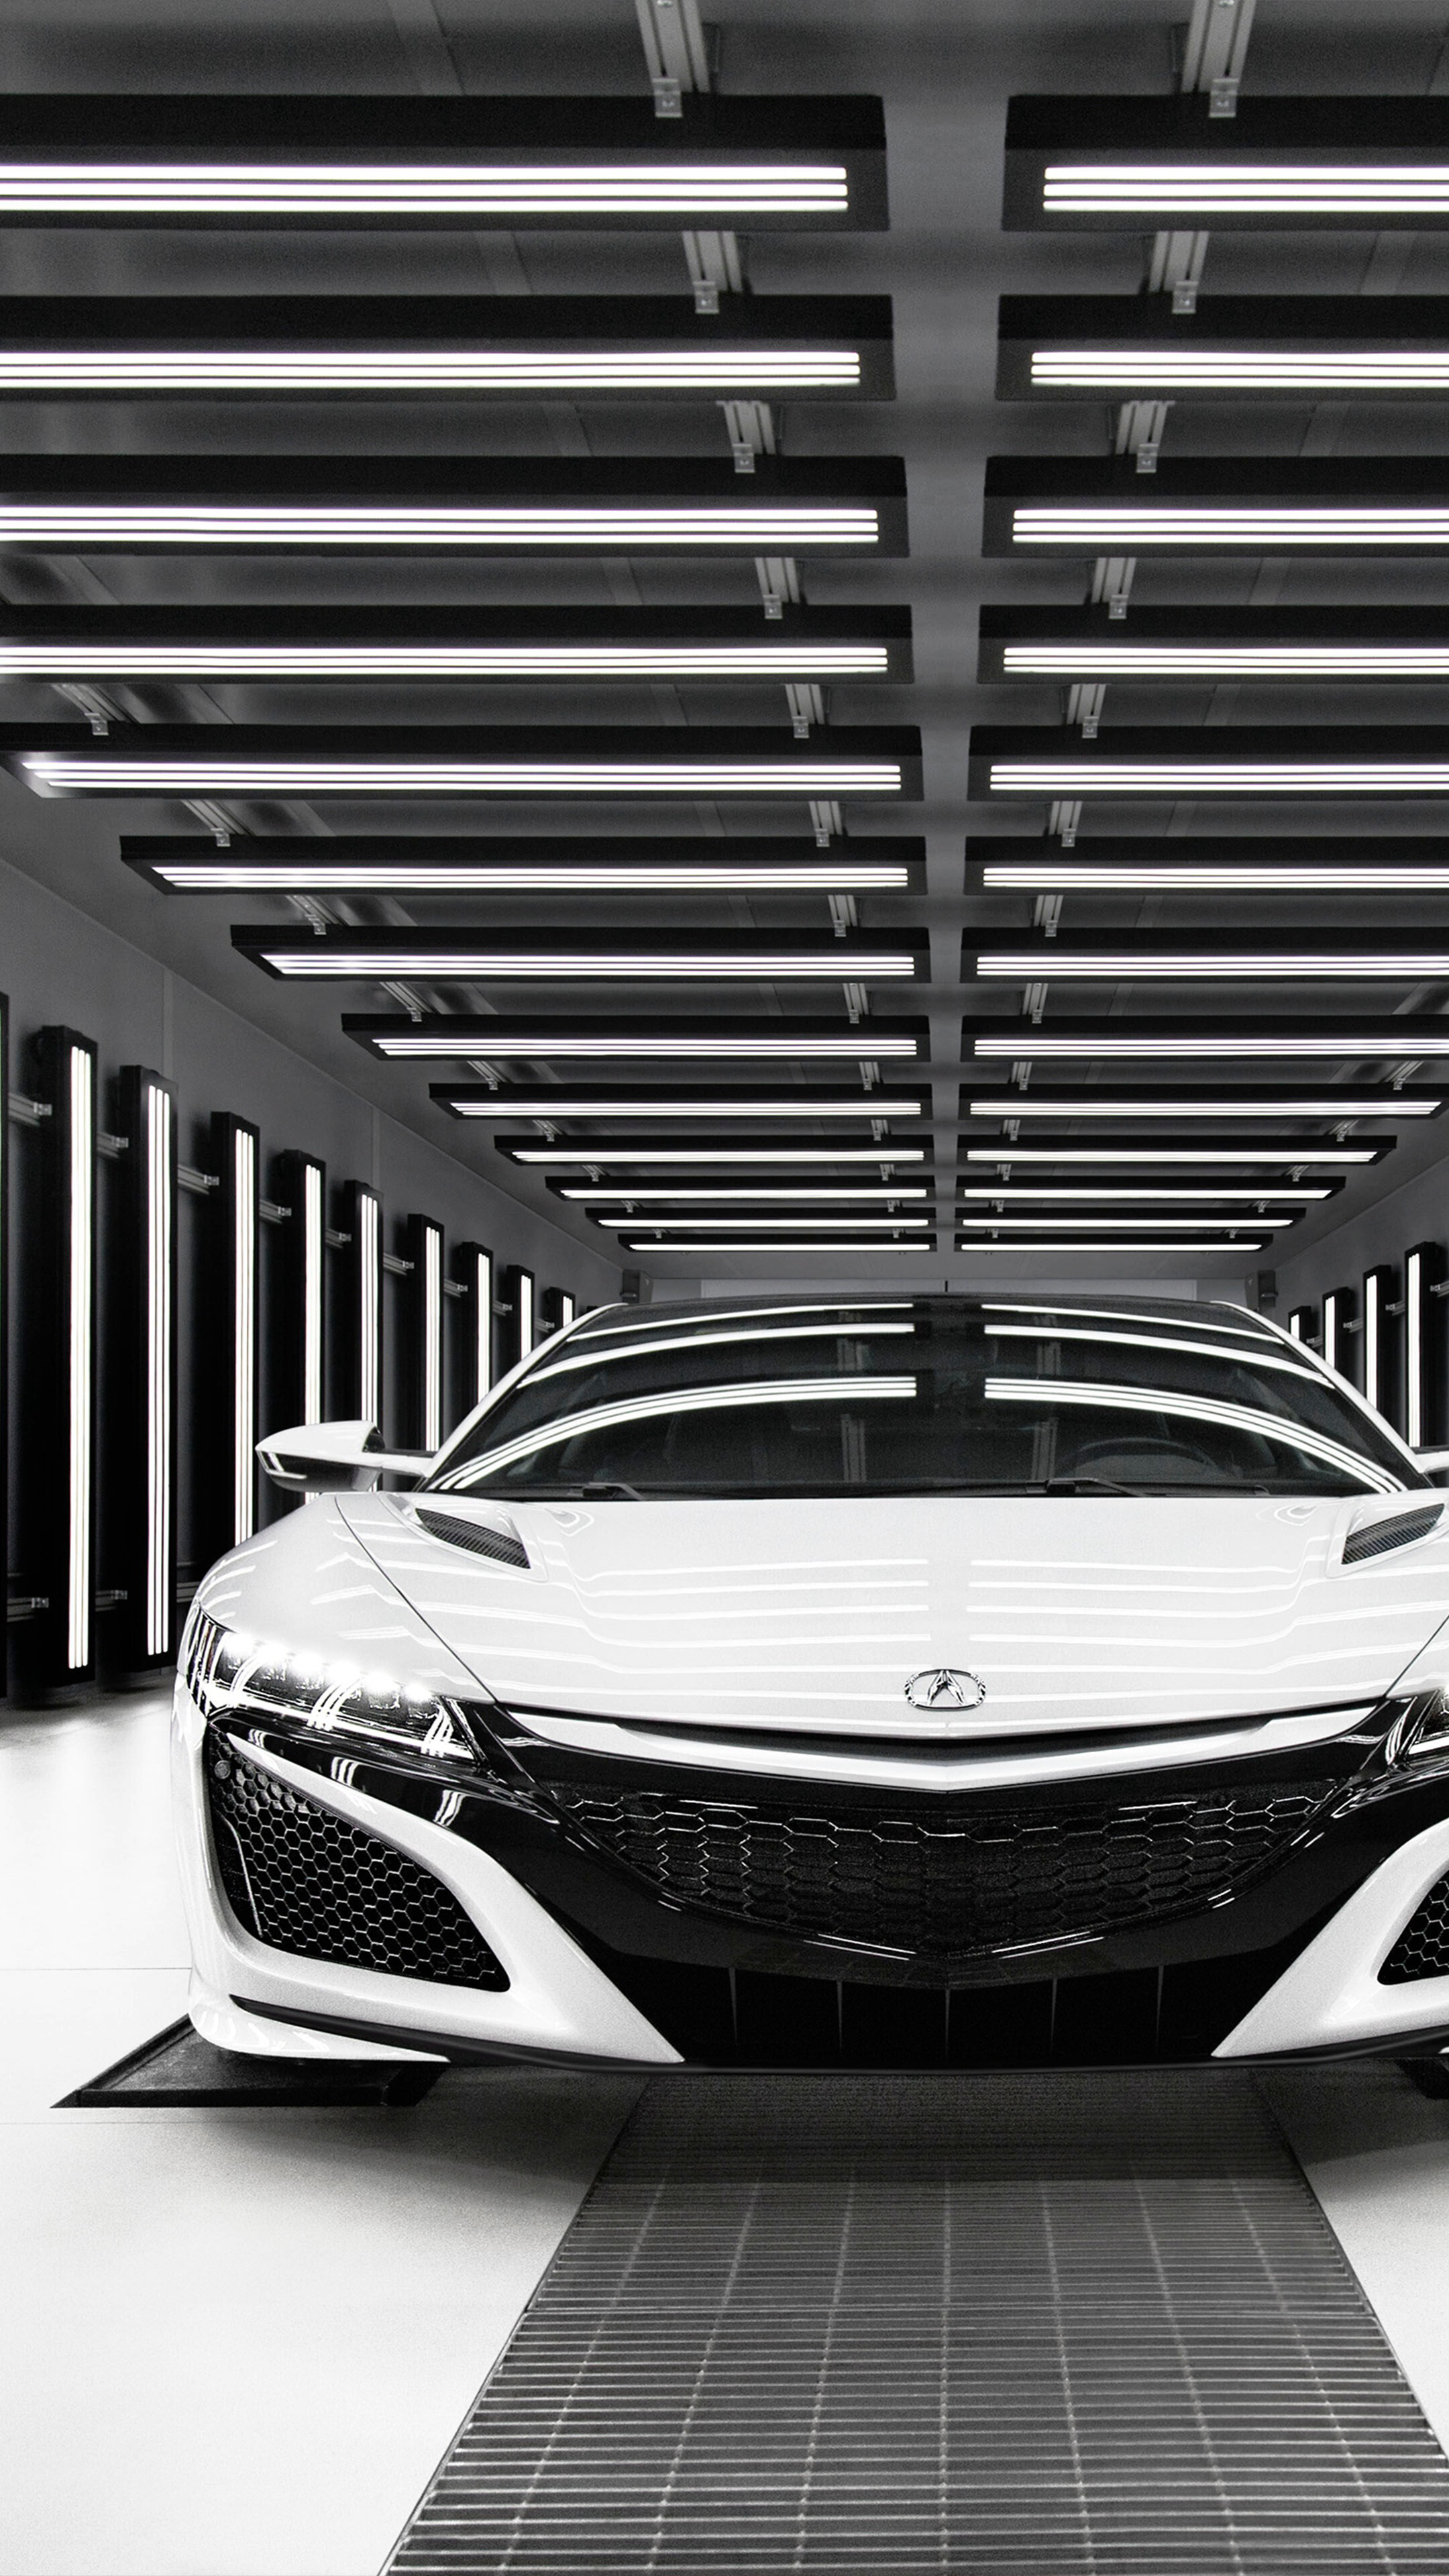 Acura: A brand owned by Honda, NSX, Monochrome. 2160x3840 4K Wallpaper.